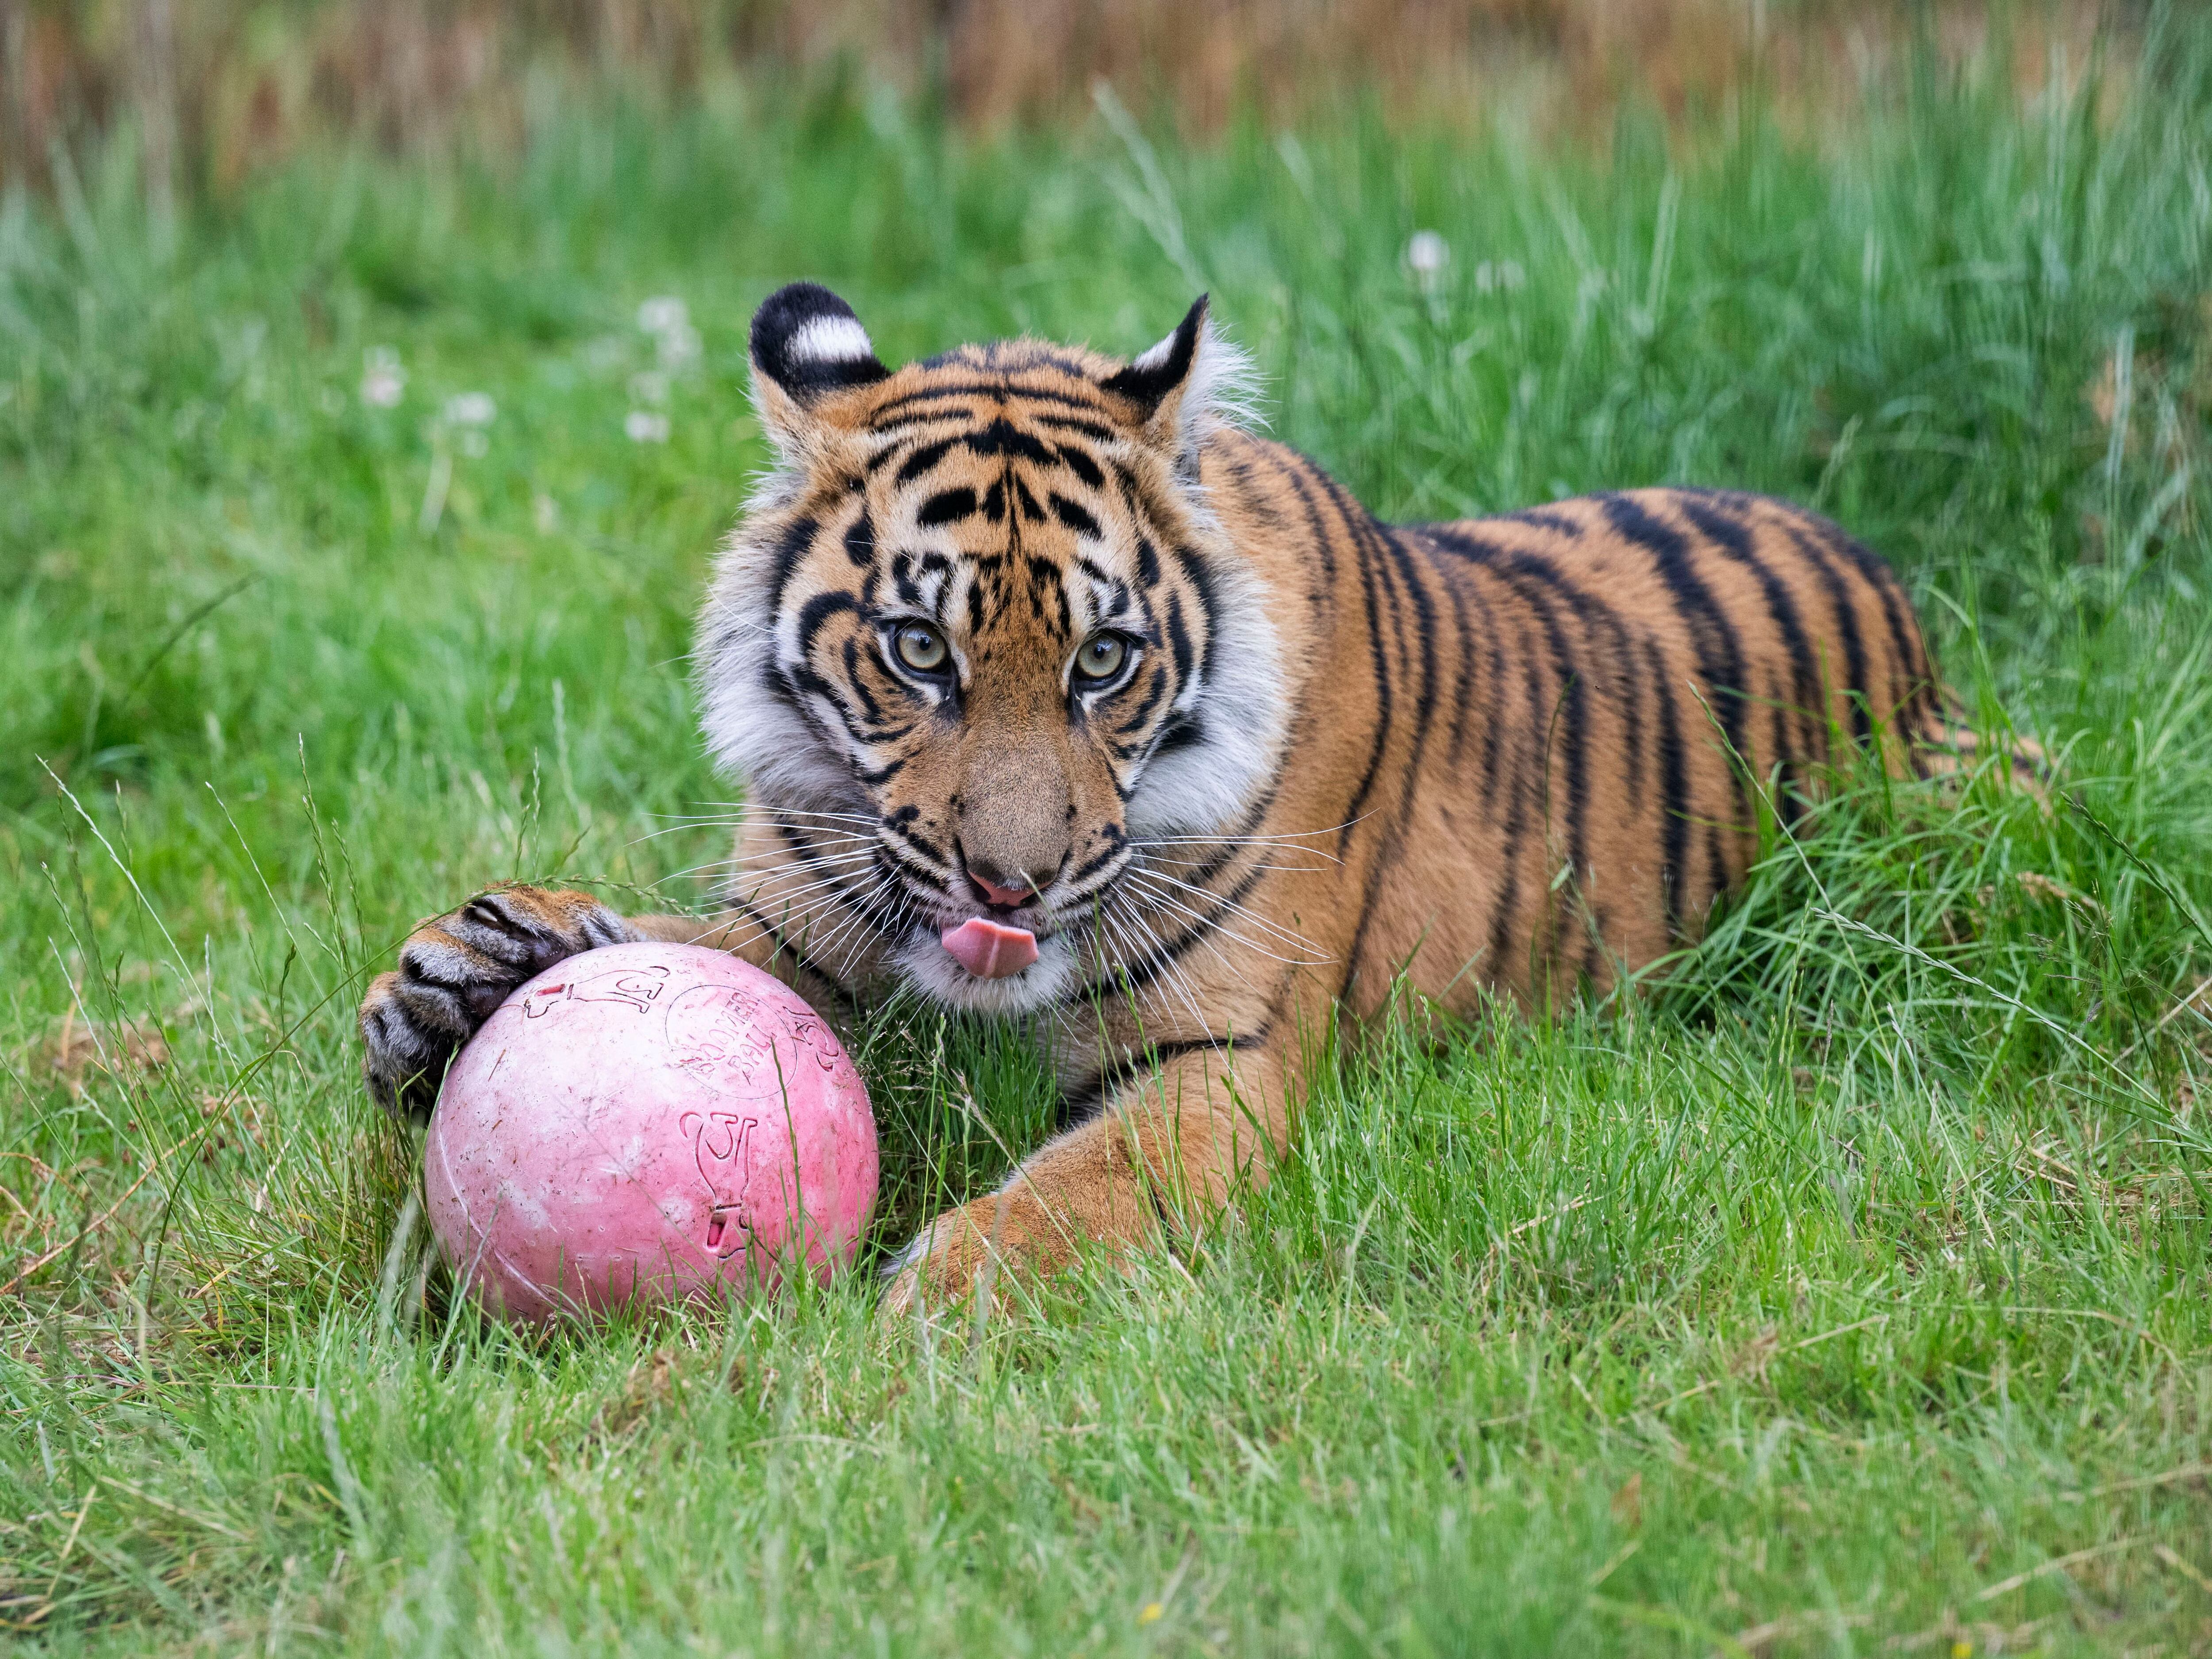 Watch: Tiger cub who used walking aids in first few weeks of life marks first birthday at West Midlands Safari Park